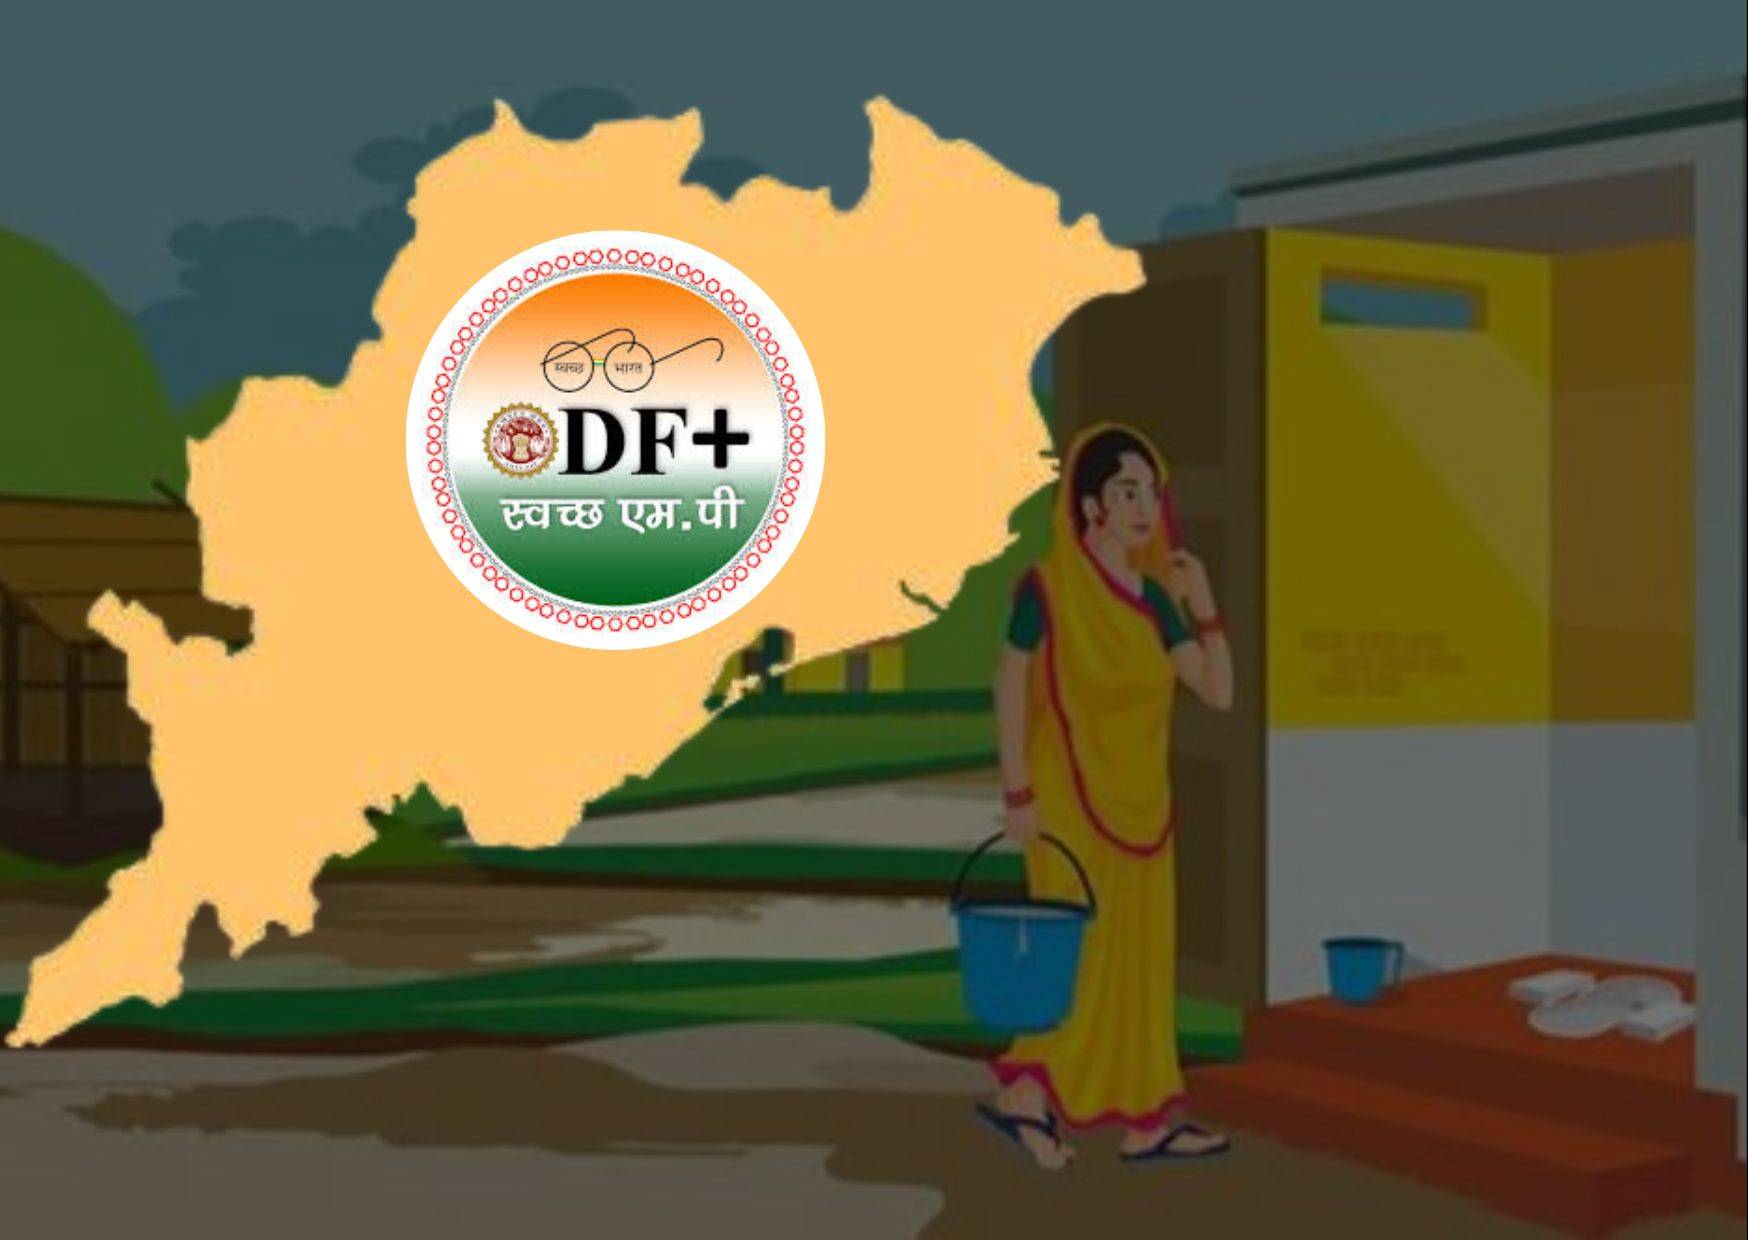 India achieves over one lakh ODF Plus villages